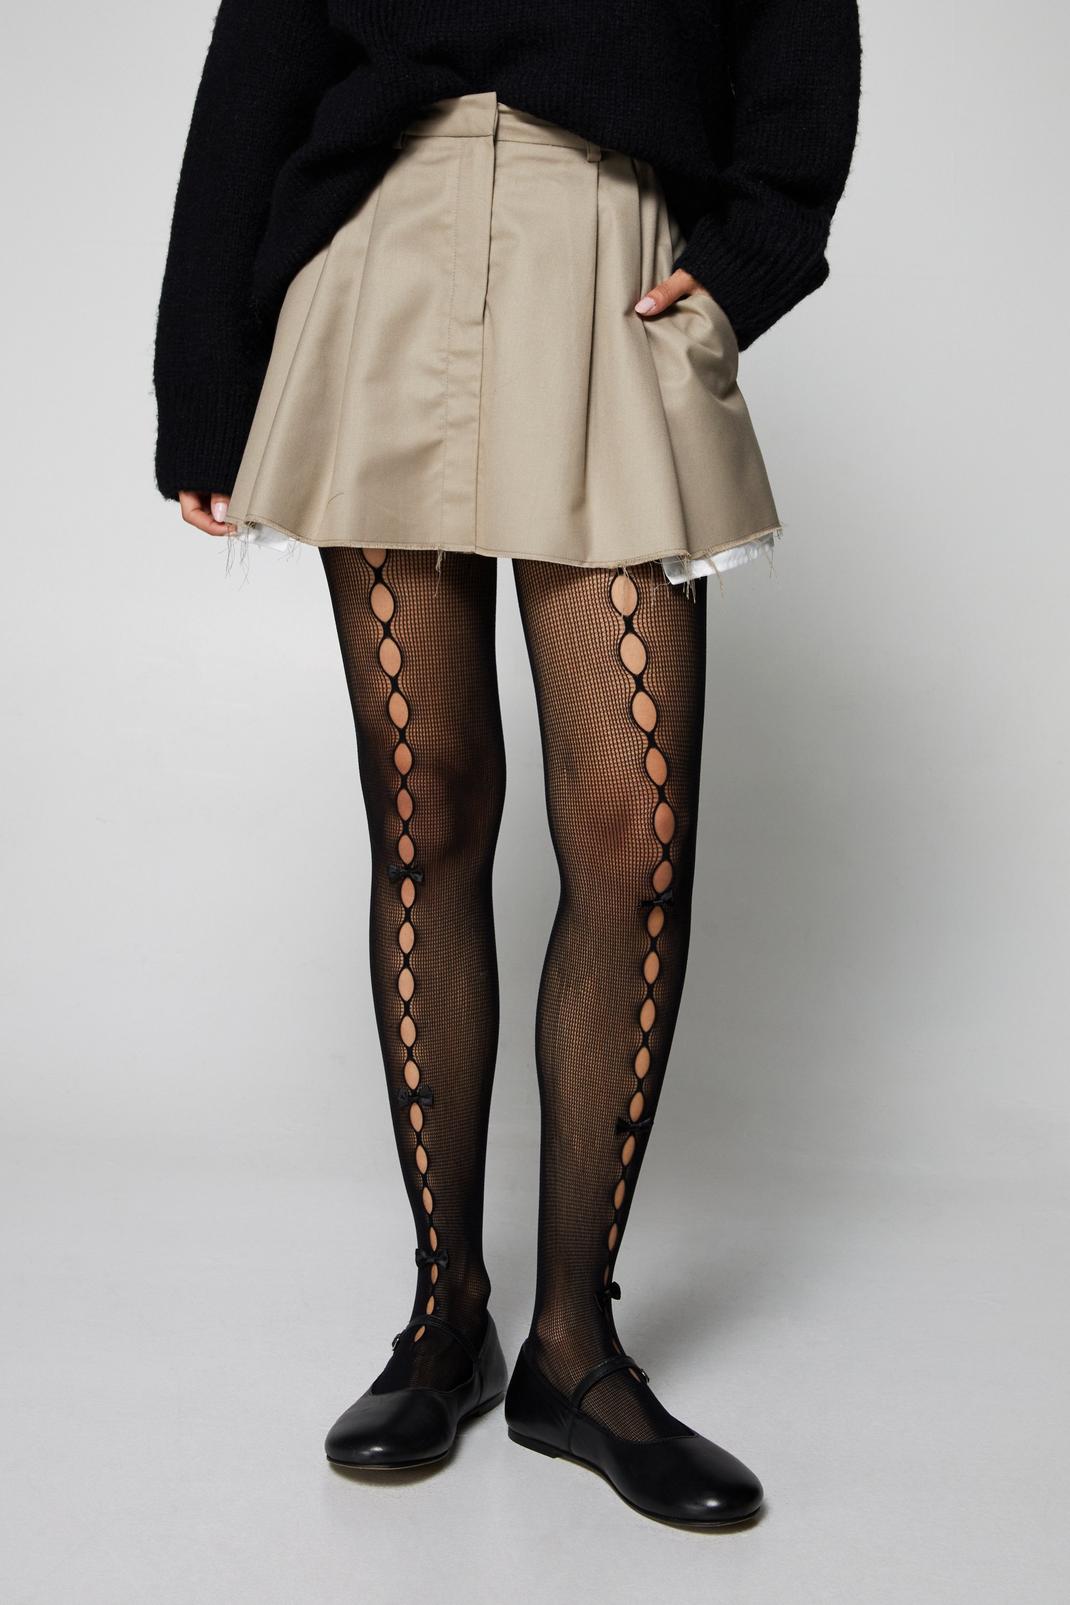 Bow Cut Out Sheer Tights